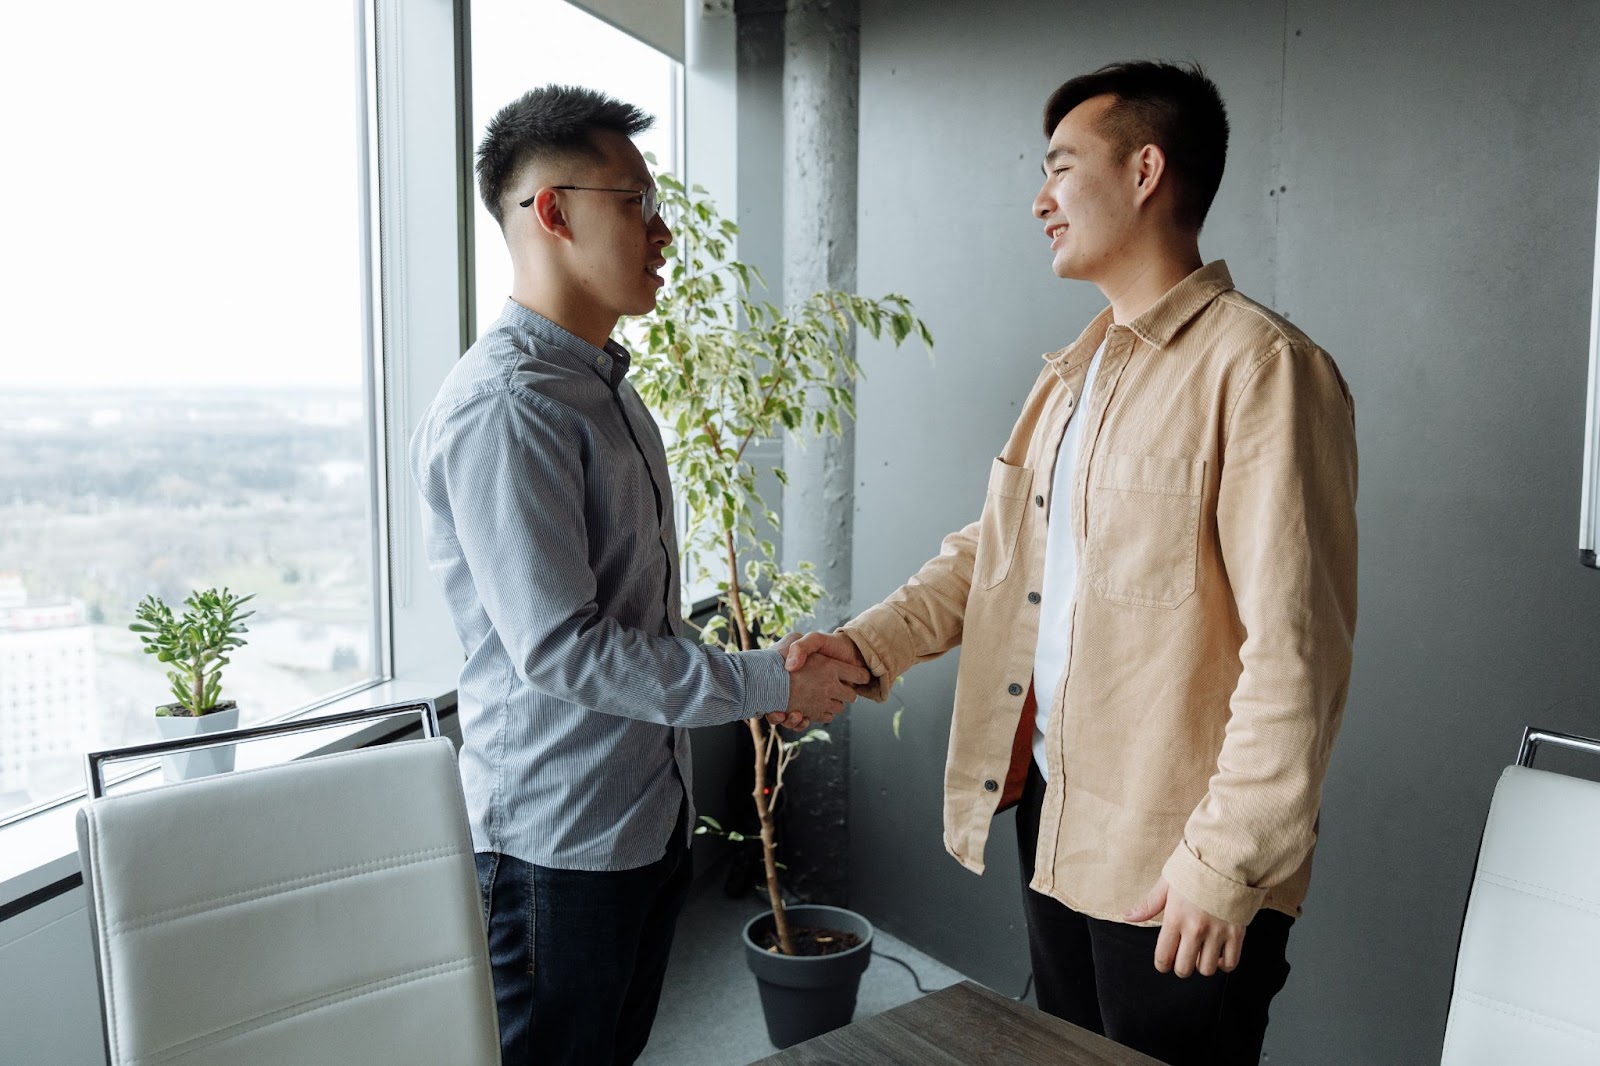 Two Asian men shaking hands at the end of an interview